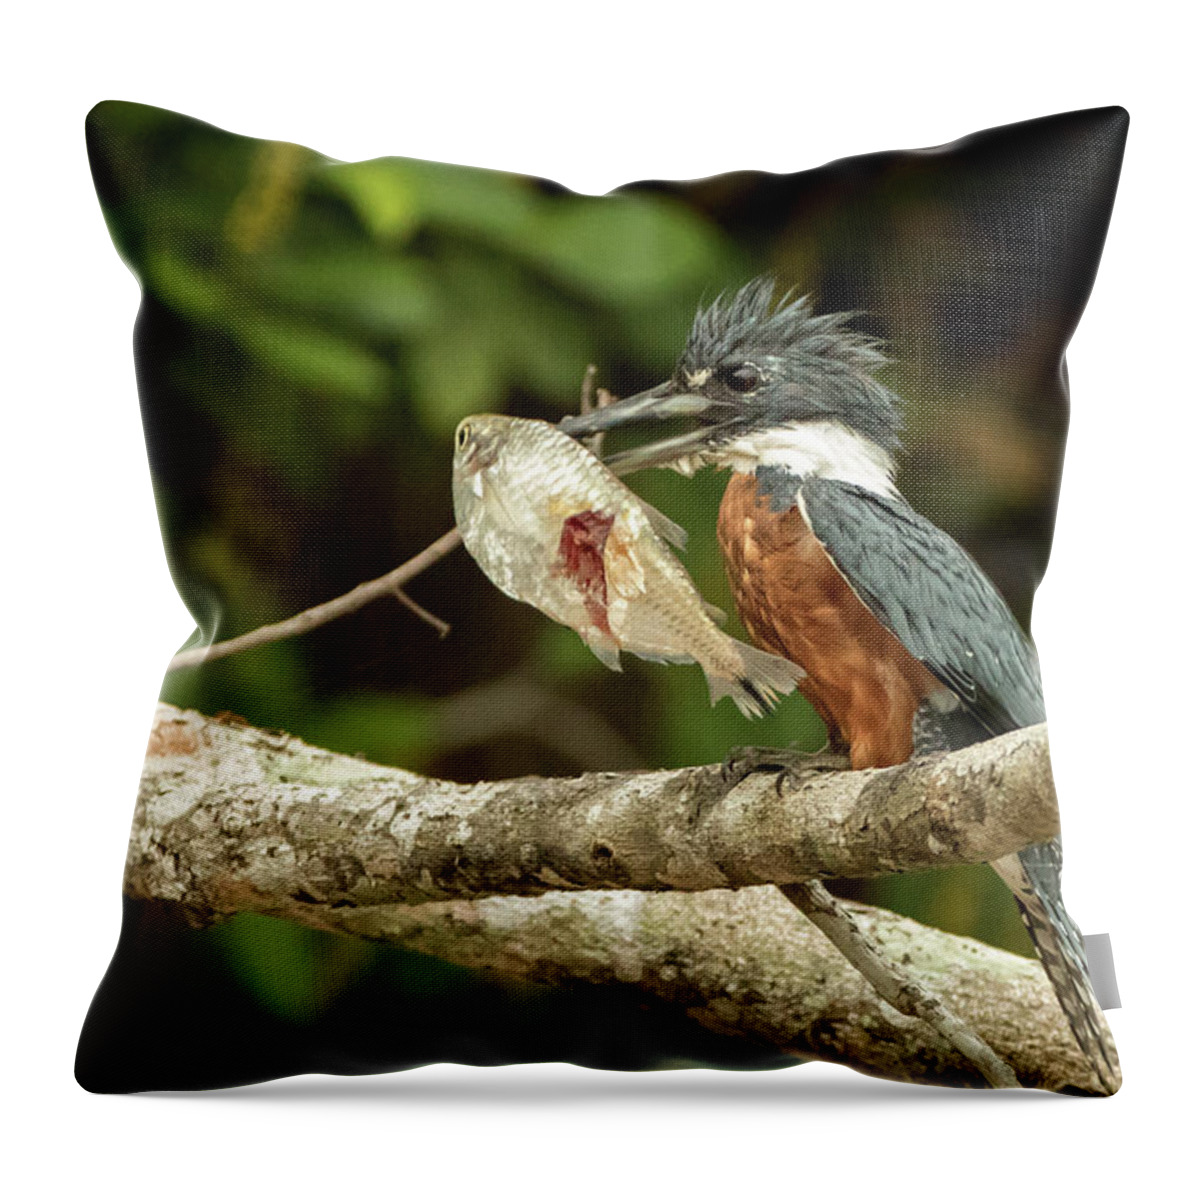 Ringed Throw Pillow featuring the photograph Ringed Kingfisher, Pantanal by Steven Upton